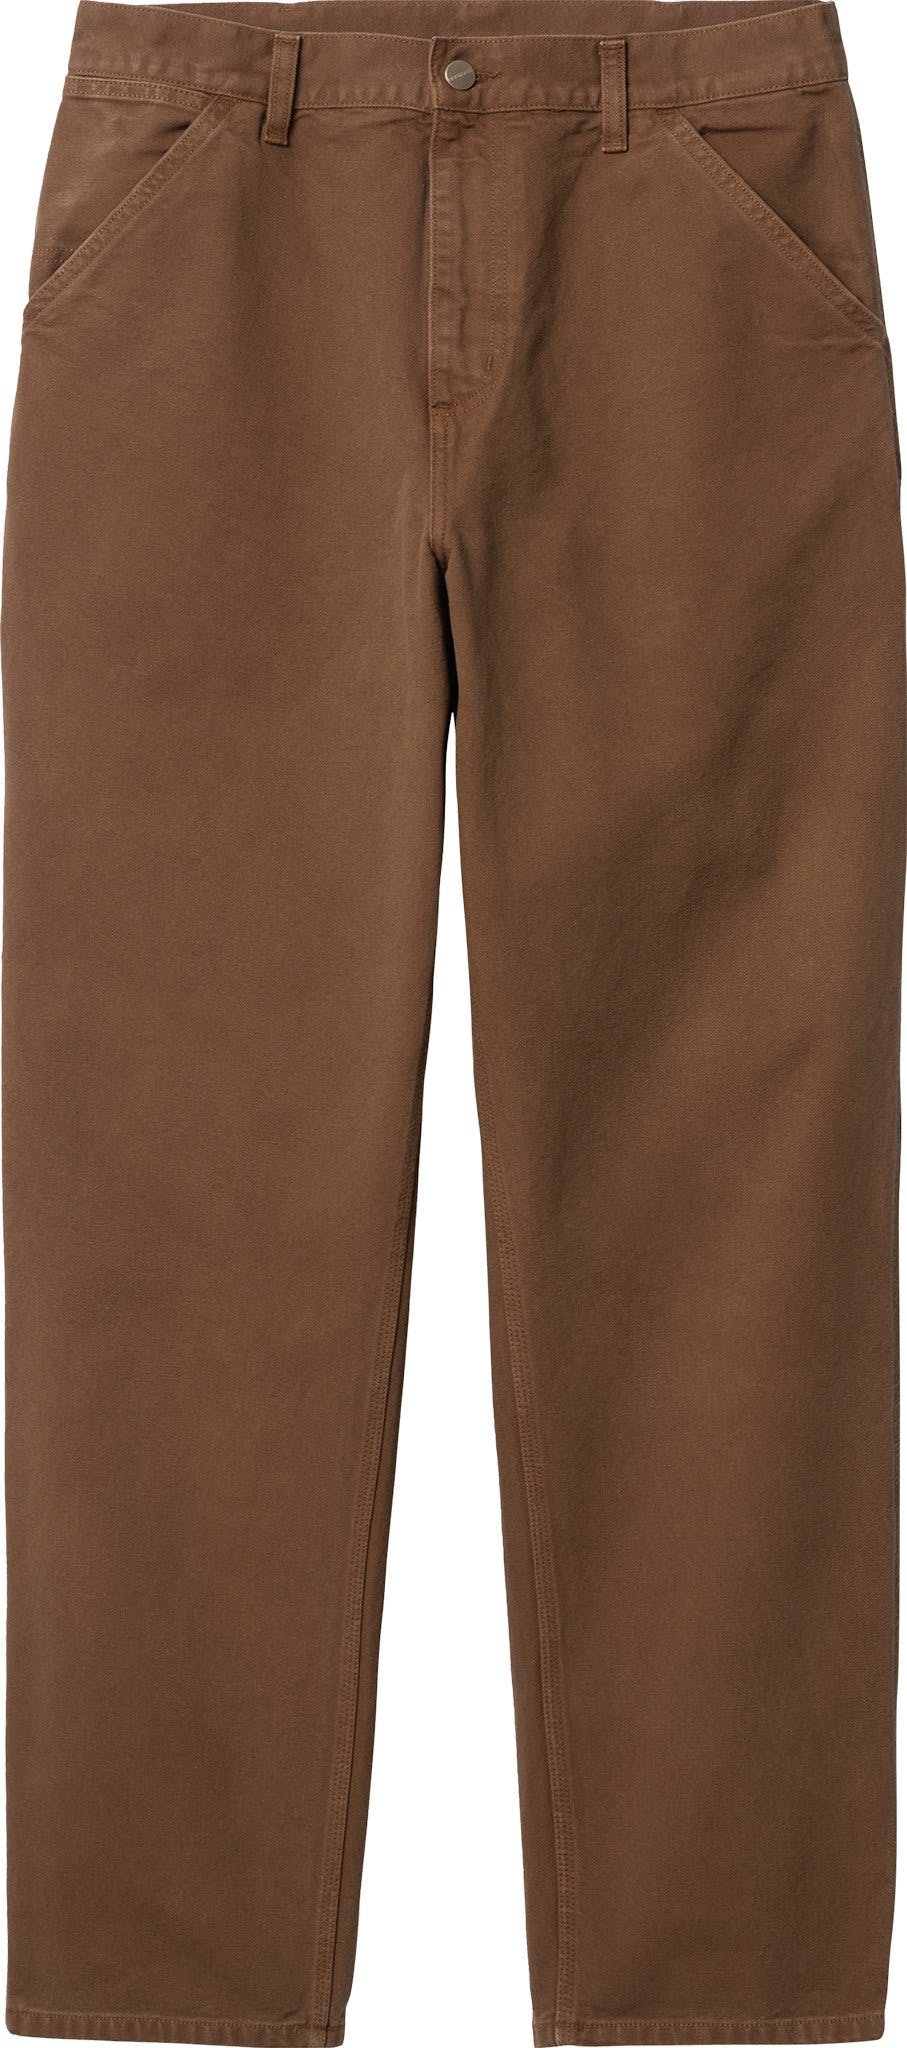 Product image for Single Knee Pant - Men's